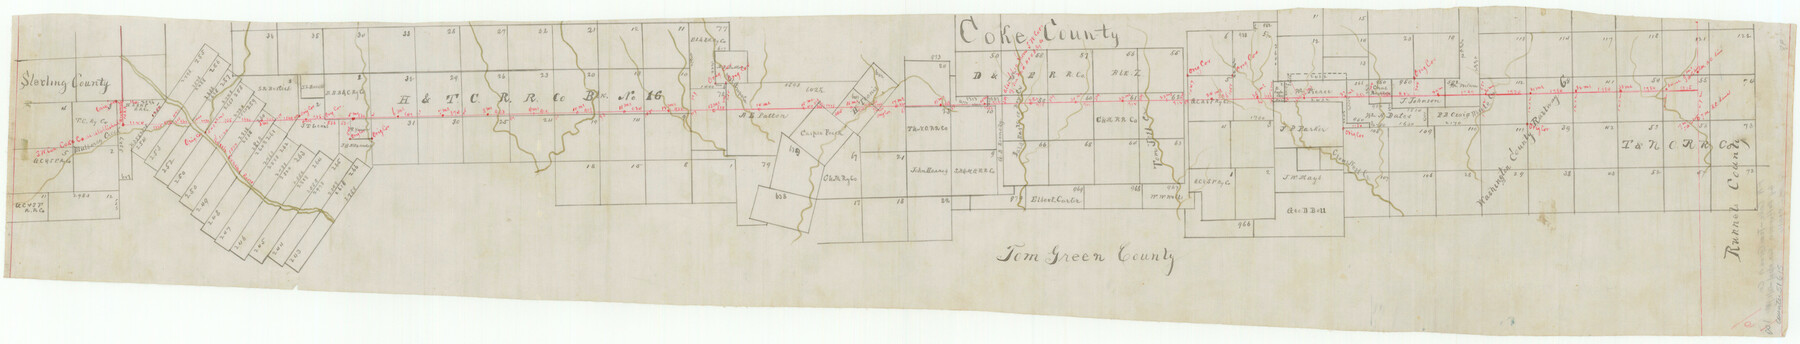 51615, Coke County Boundary File 6, General Map Collection